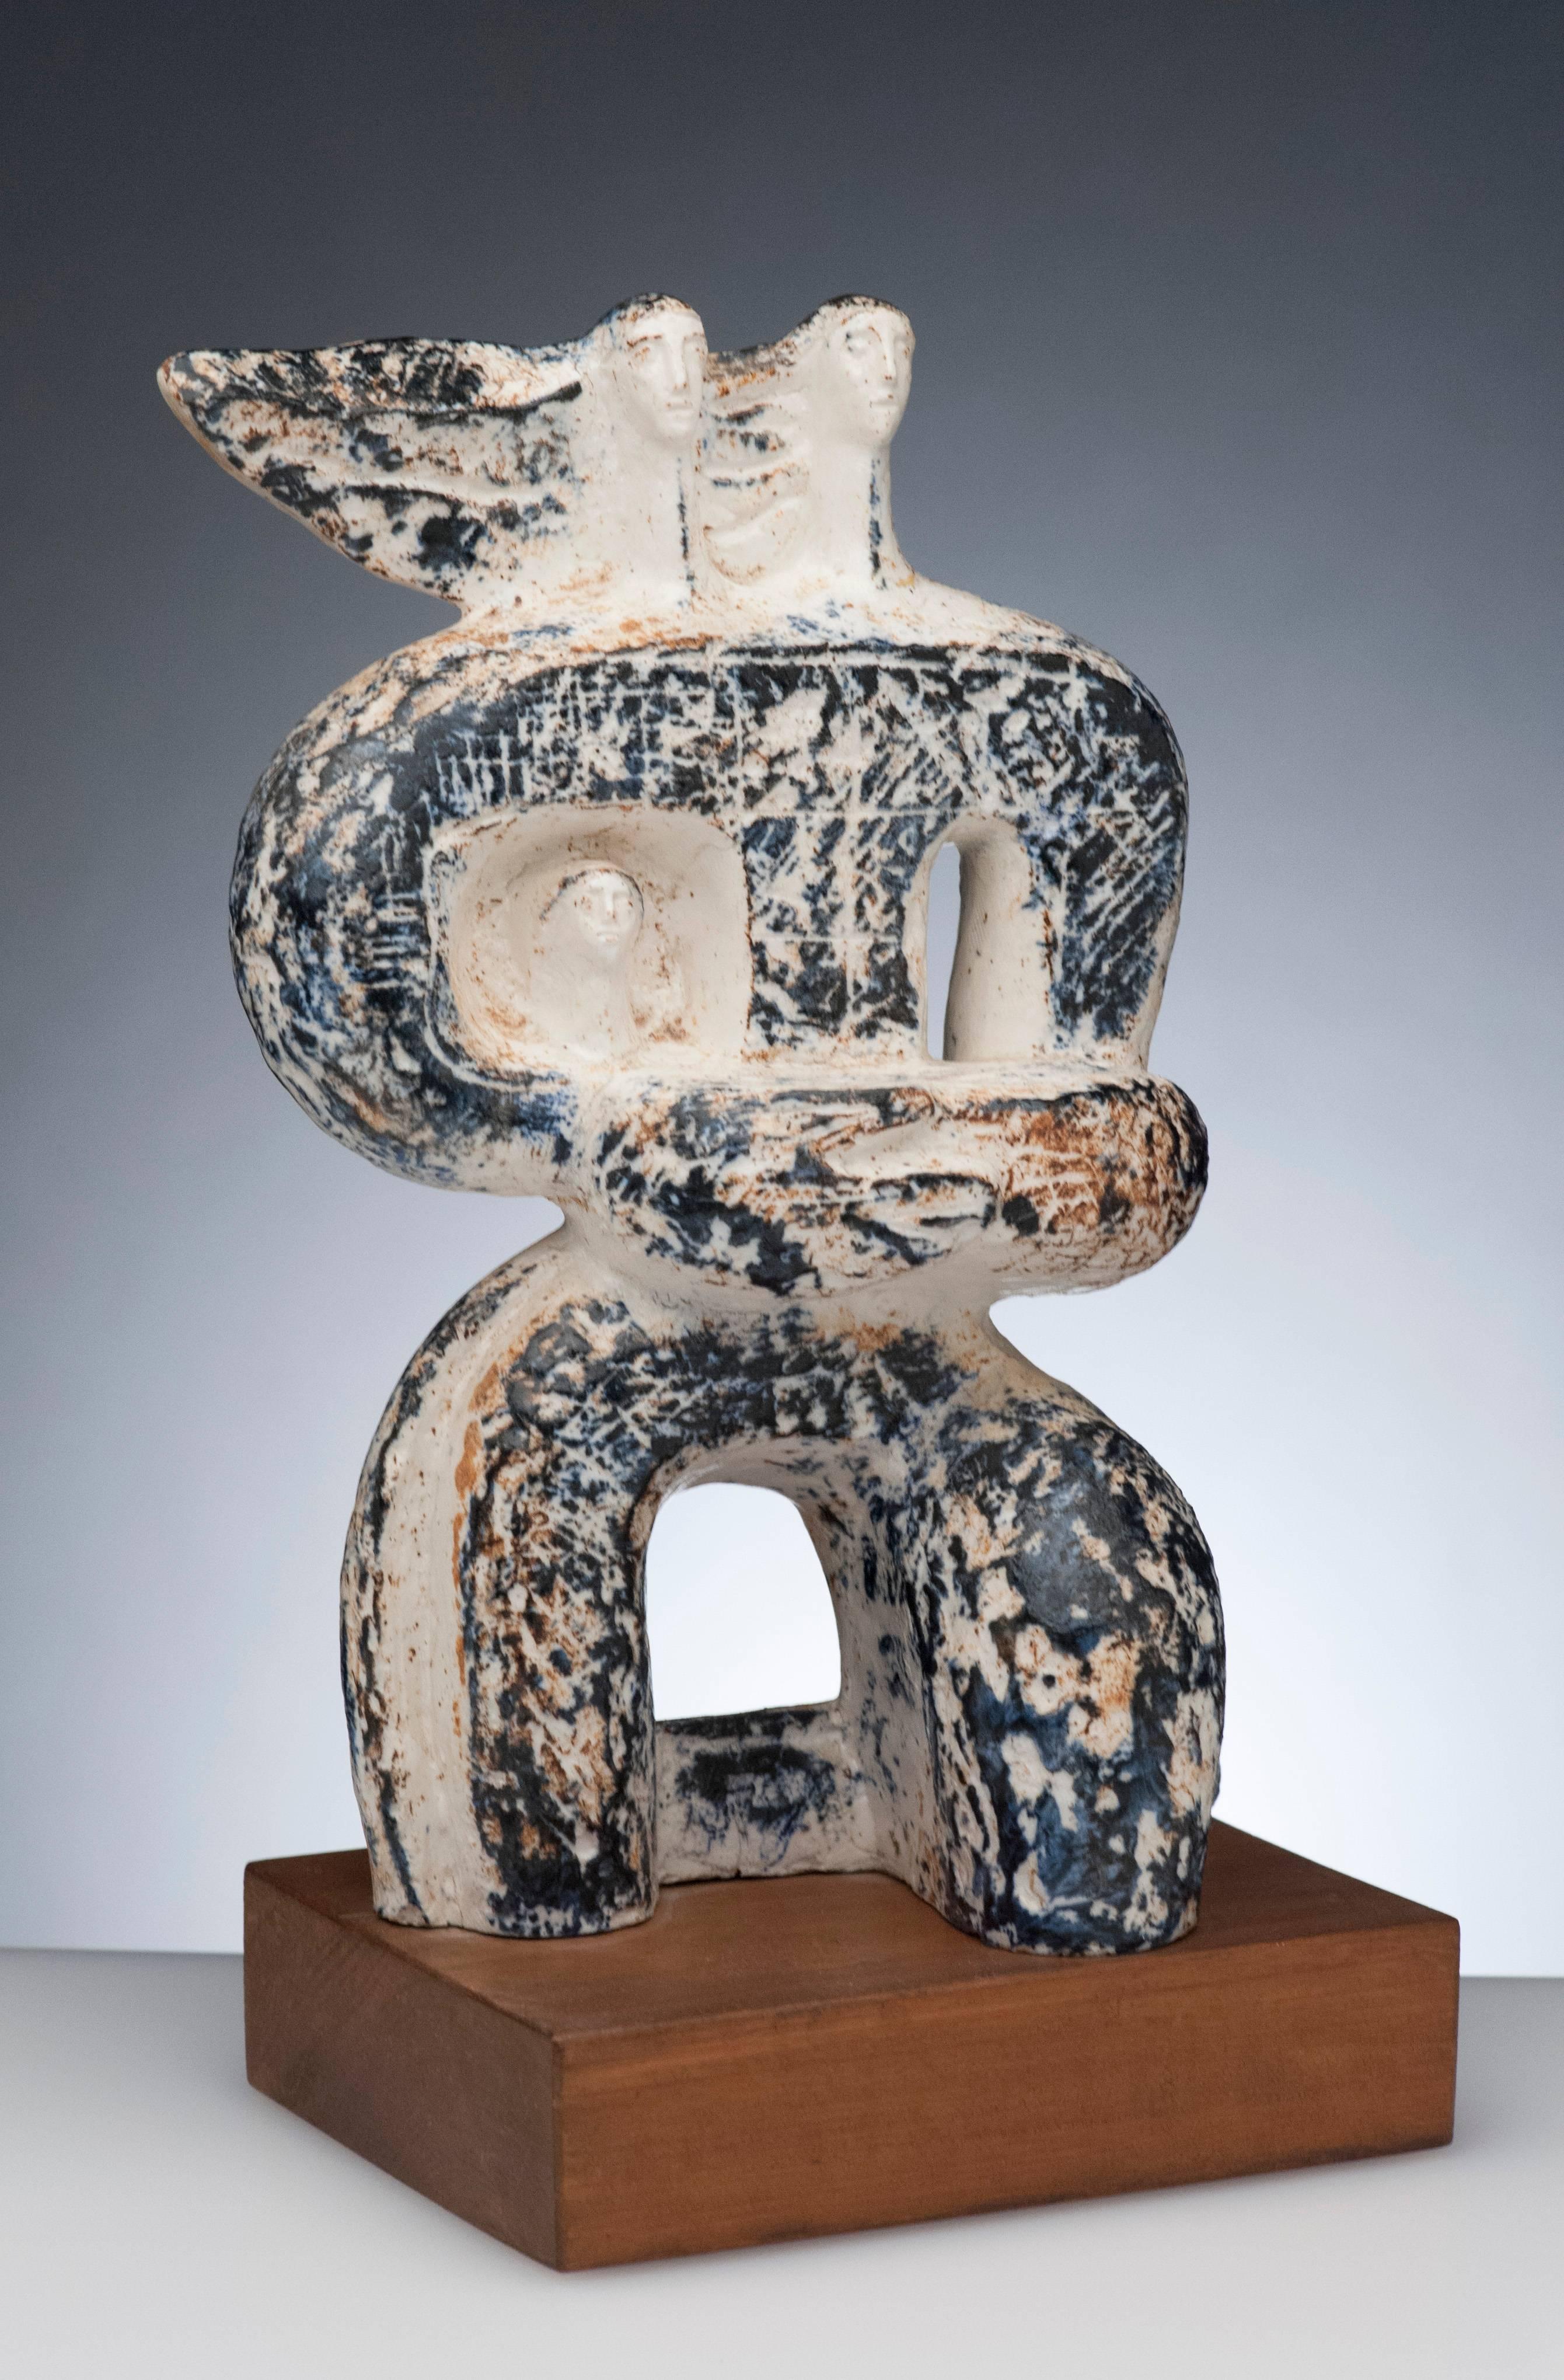 Mid-20th Century Art Deco Modern Abstract Figurative Ceramic Sculpture by Arnold Geissbuhler